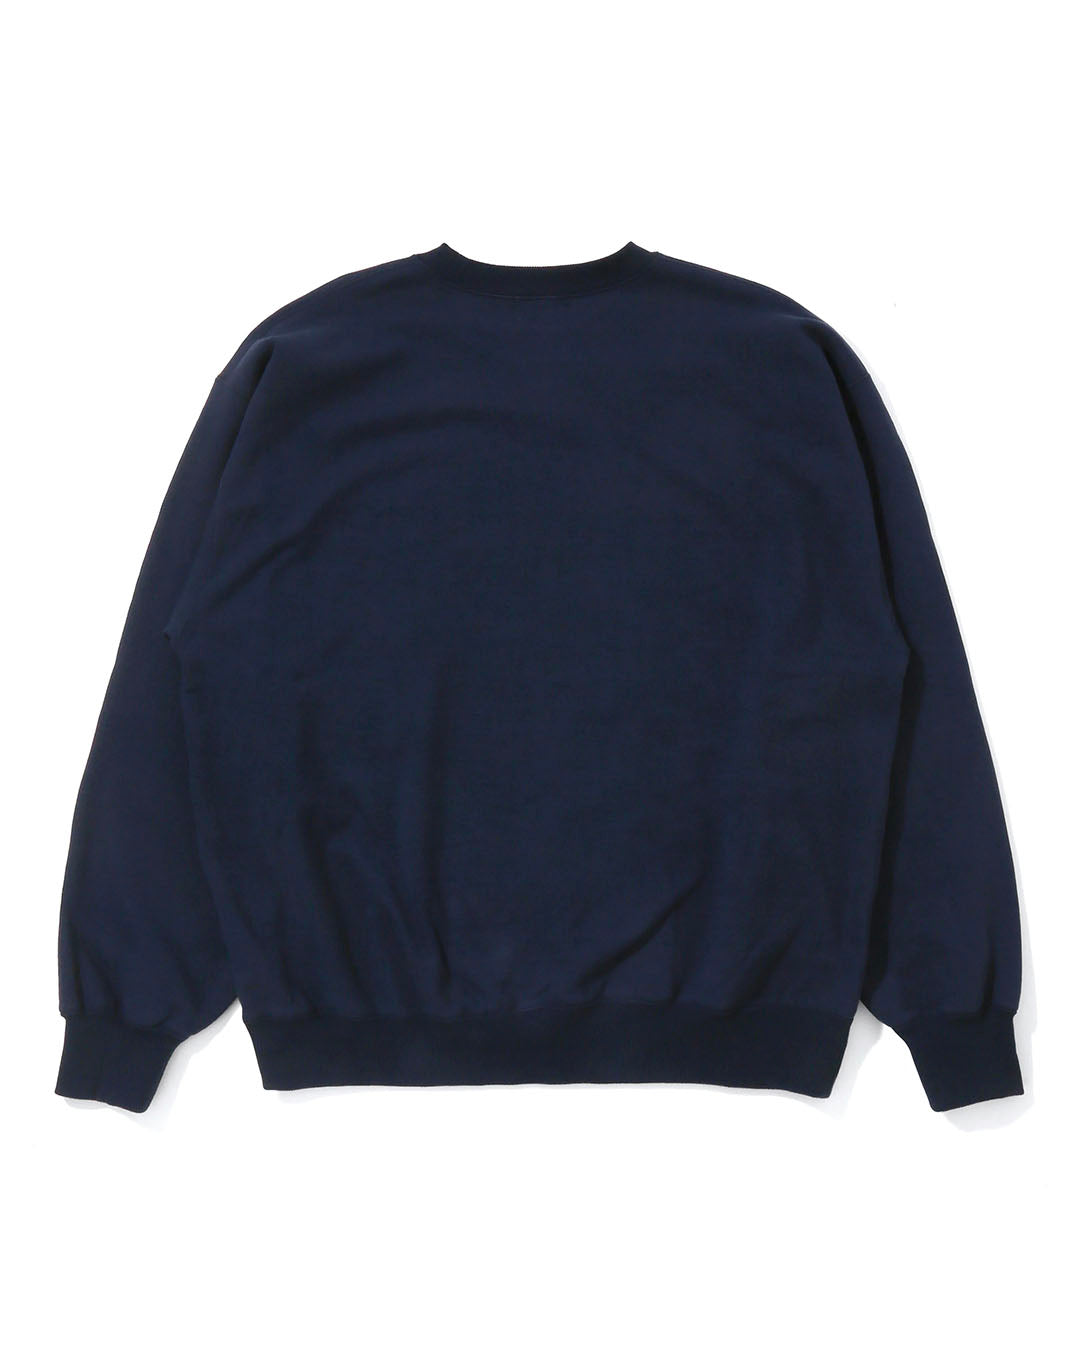 [CITY COUNTRY CITY] COTTON SWEAT SHIRT COLLEGE LOGO - NAVY